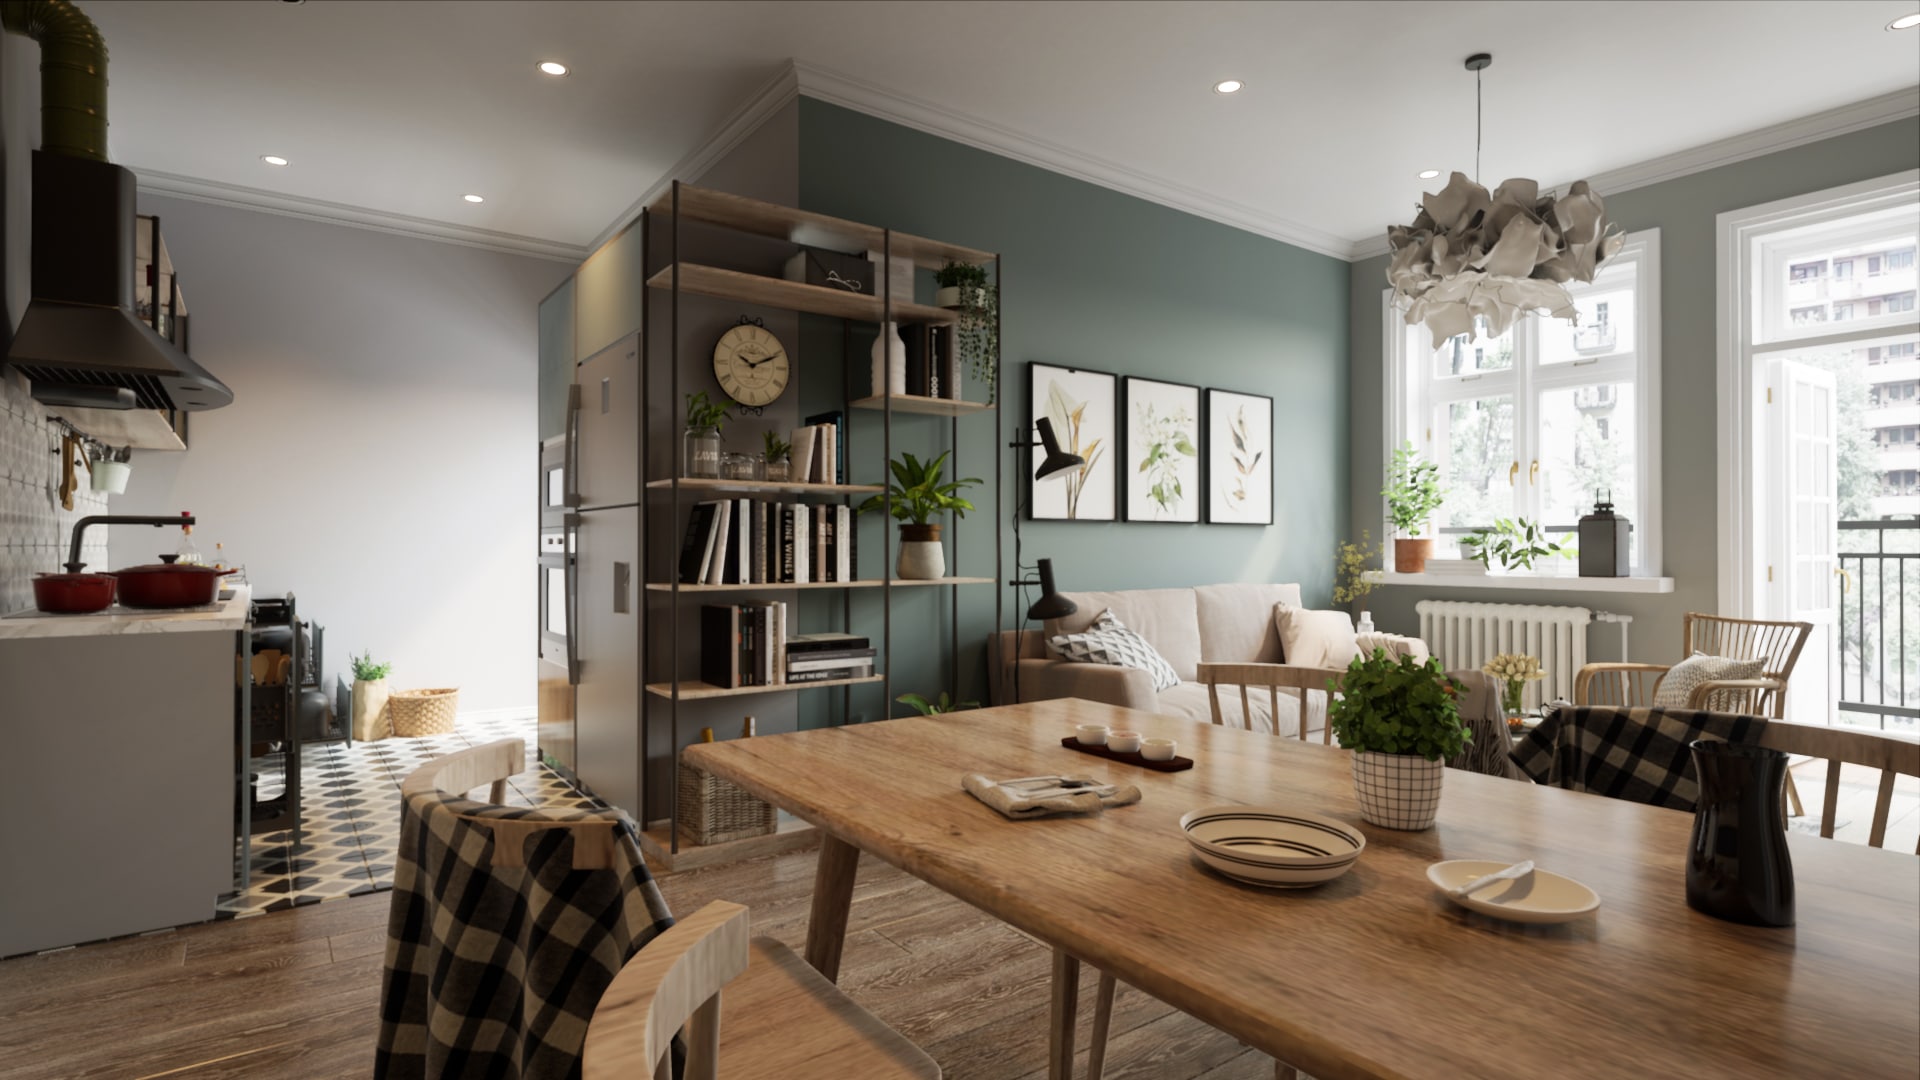 Photorealistic Interior in Unreal Engine Complete tutorial series Step